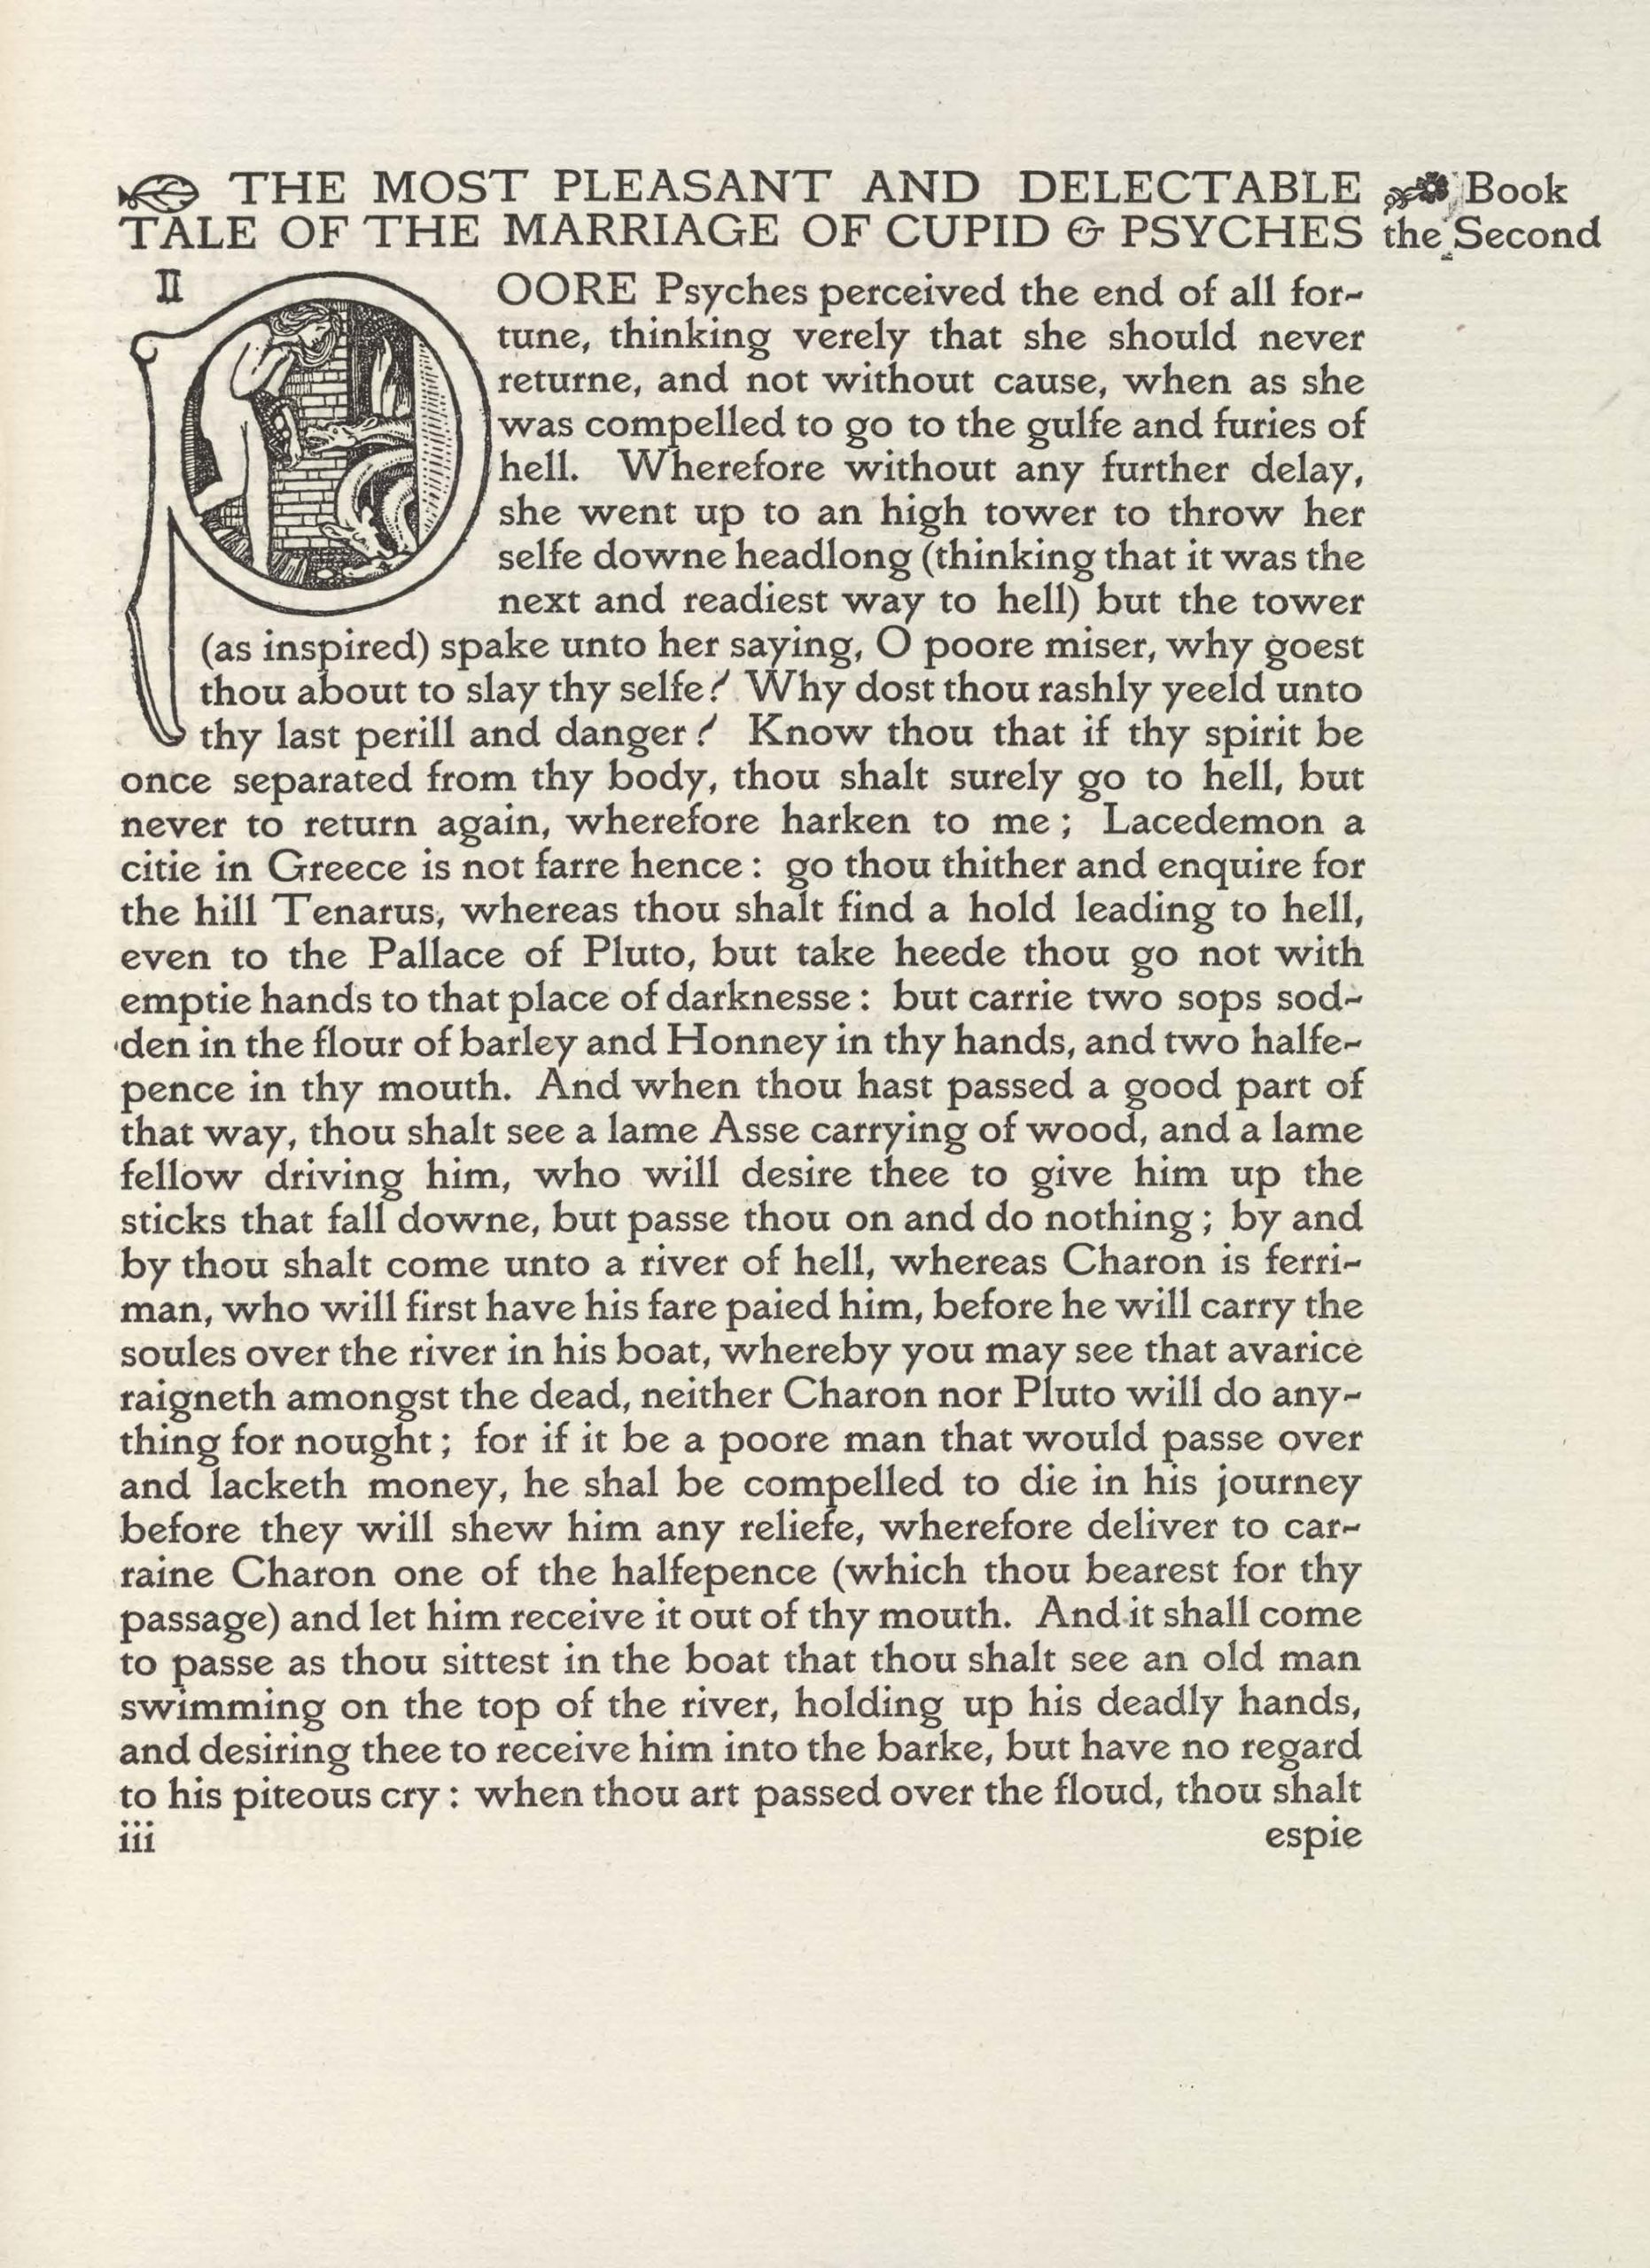 Page 3 of 4. The insert is printed on four pages, numbered i-iv, in black ink. On
      the first page, 
      the title is printed in caps, centred, at the top of the page. The subheading is printed
      on the second 
      page, aligned left, in caps, preceded by a fleuron. The third and fourth pages are
      full-page samples of 
      the Vale type. The third page shows the title in caps, with fleurons, and an illuminated
      drop-cap P. 
      Within the P is a small historiated image, or scene. In the left foreground, a nude
      woman bends in profile 
      toward the centre of the image, descending steps, her body following the curve of
      the letter P. She carries 
      a basket over her left arm and clutches her long hair in her right. On the right side
      of the image, three 
      heads of a hydra emerge from an open doorway, facing the woman. They are set against
      a brick wall background. 
      The rest of the text continues in upper and lower case. The page has a large right-hand
      margin, which is 
      empty except for a fleuron and subtitle at the top of the page. The fourth page is
      the same as the third, 
      except the text is in all caps with a much smaller right margin.